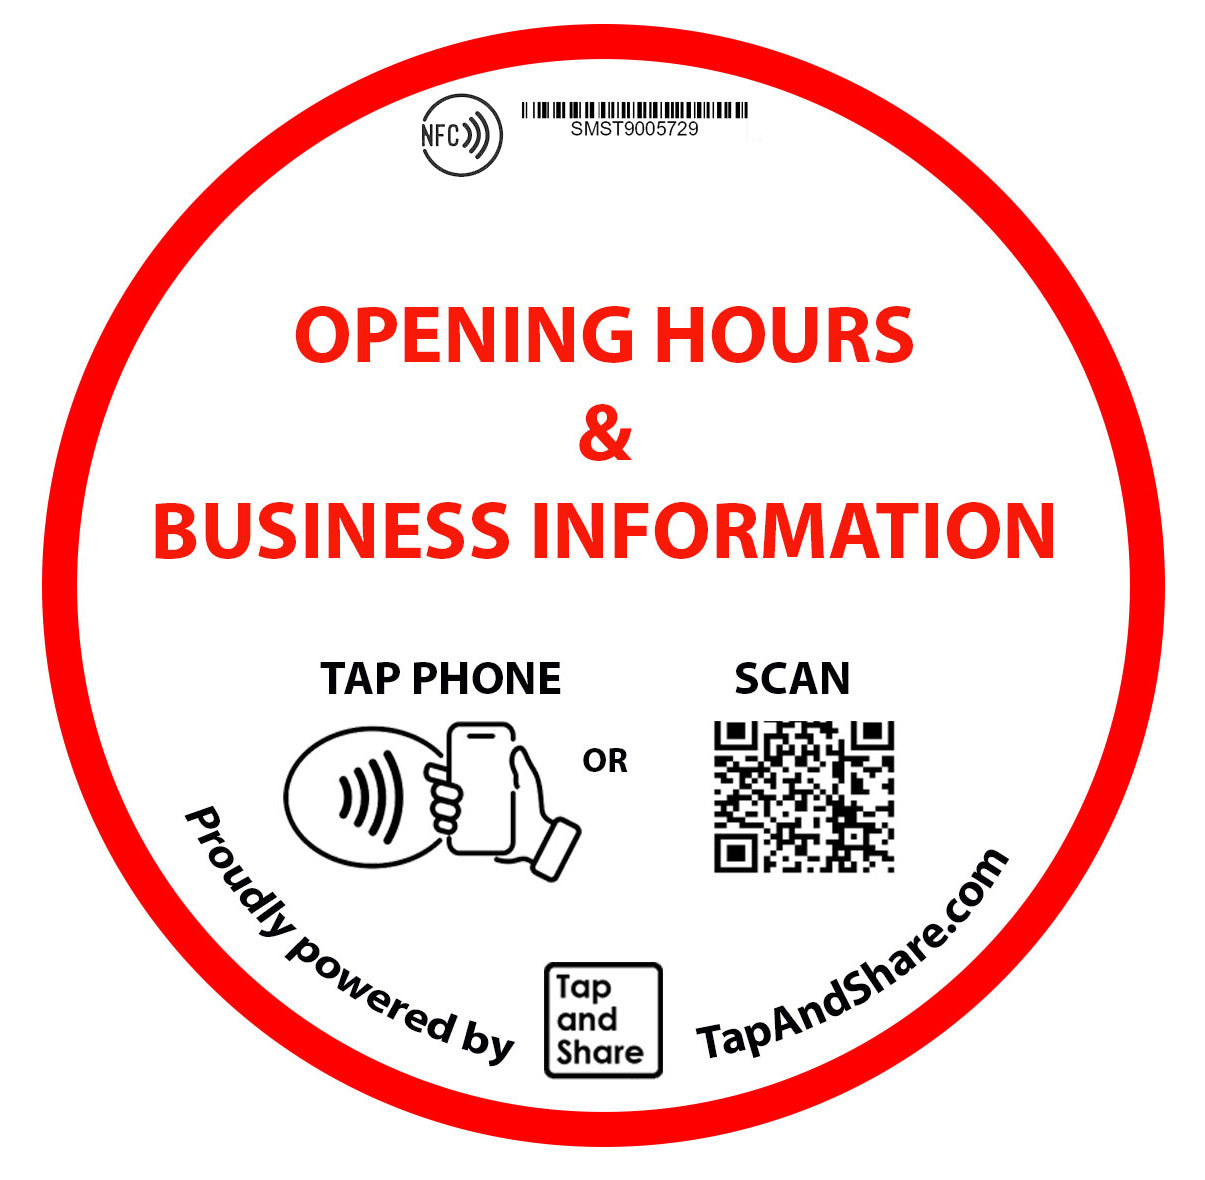 Large 10cm Contactless Smart NFC 'Opening Hours & Business Information' Round Epoxy Sticker + QR code business card | Extra Durable | Stick it on your Door, Wall or Window